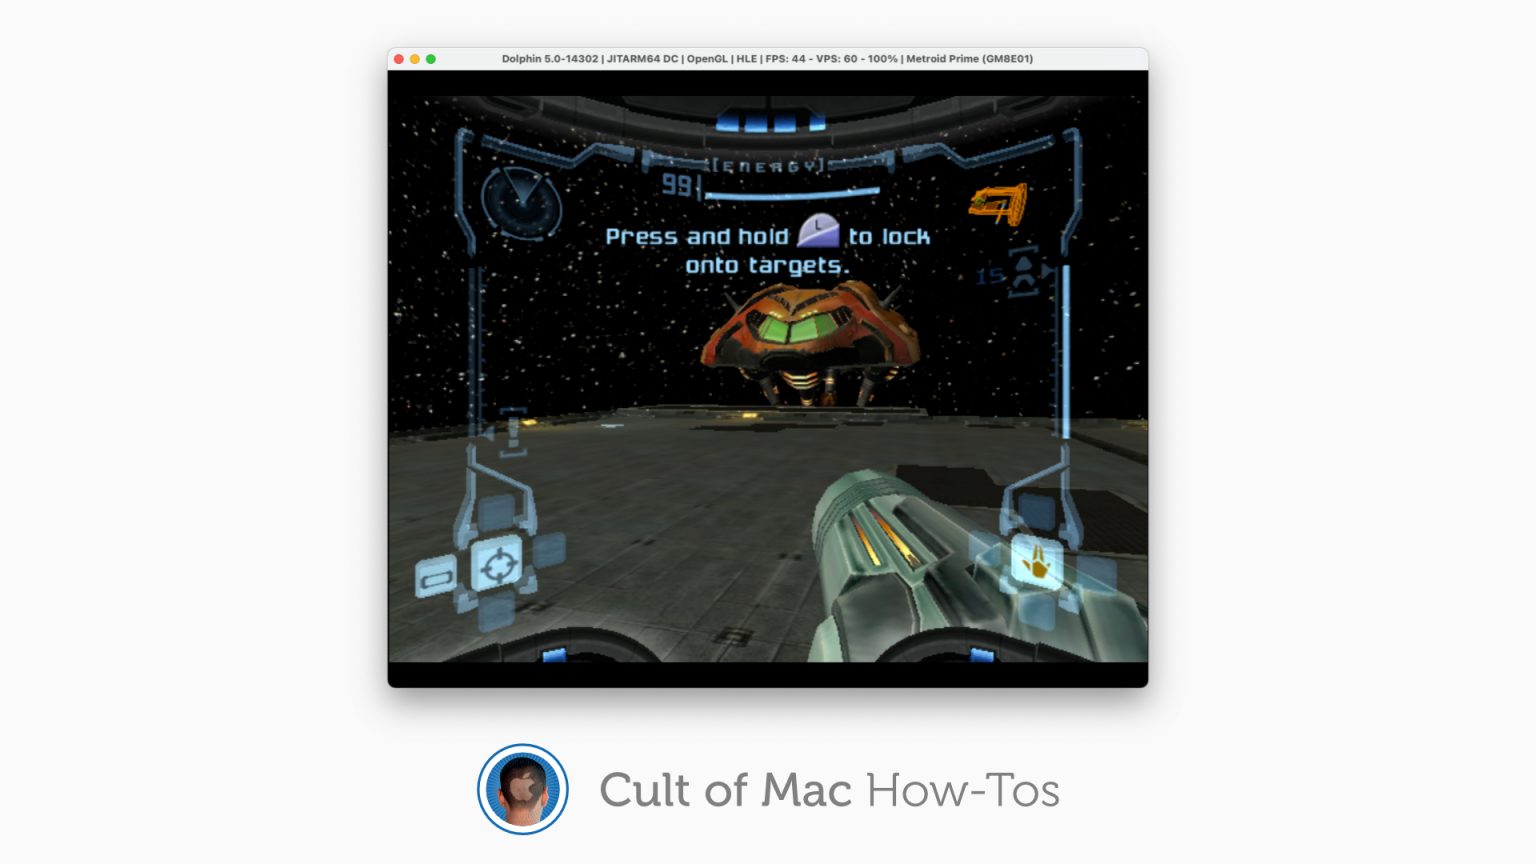 Play GameCube and Wii games on Mac